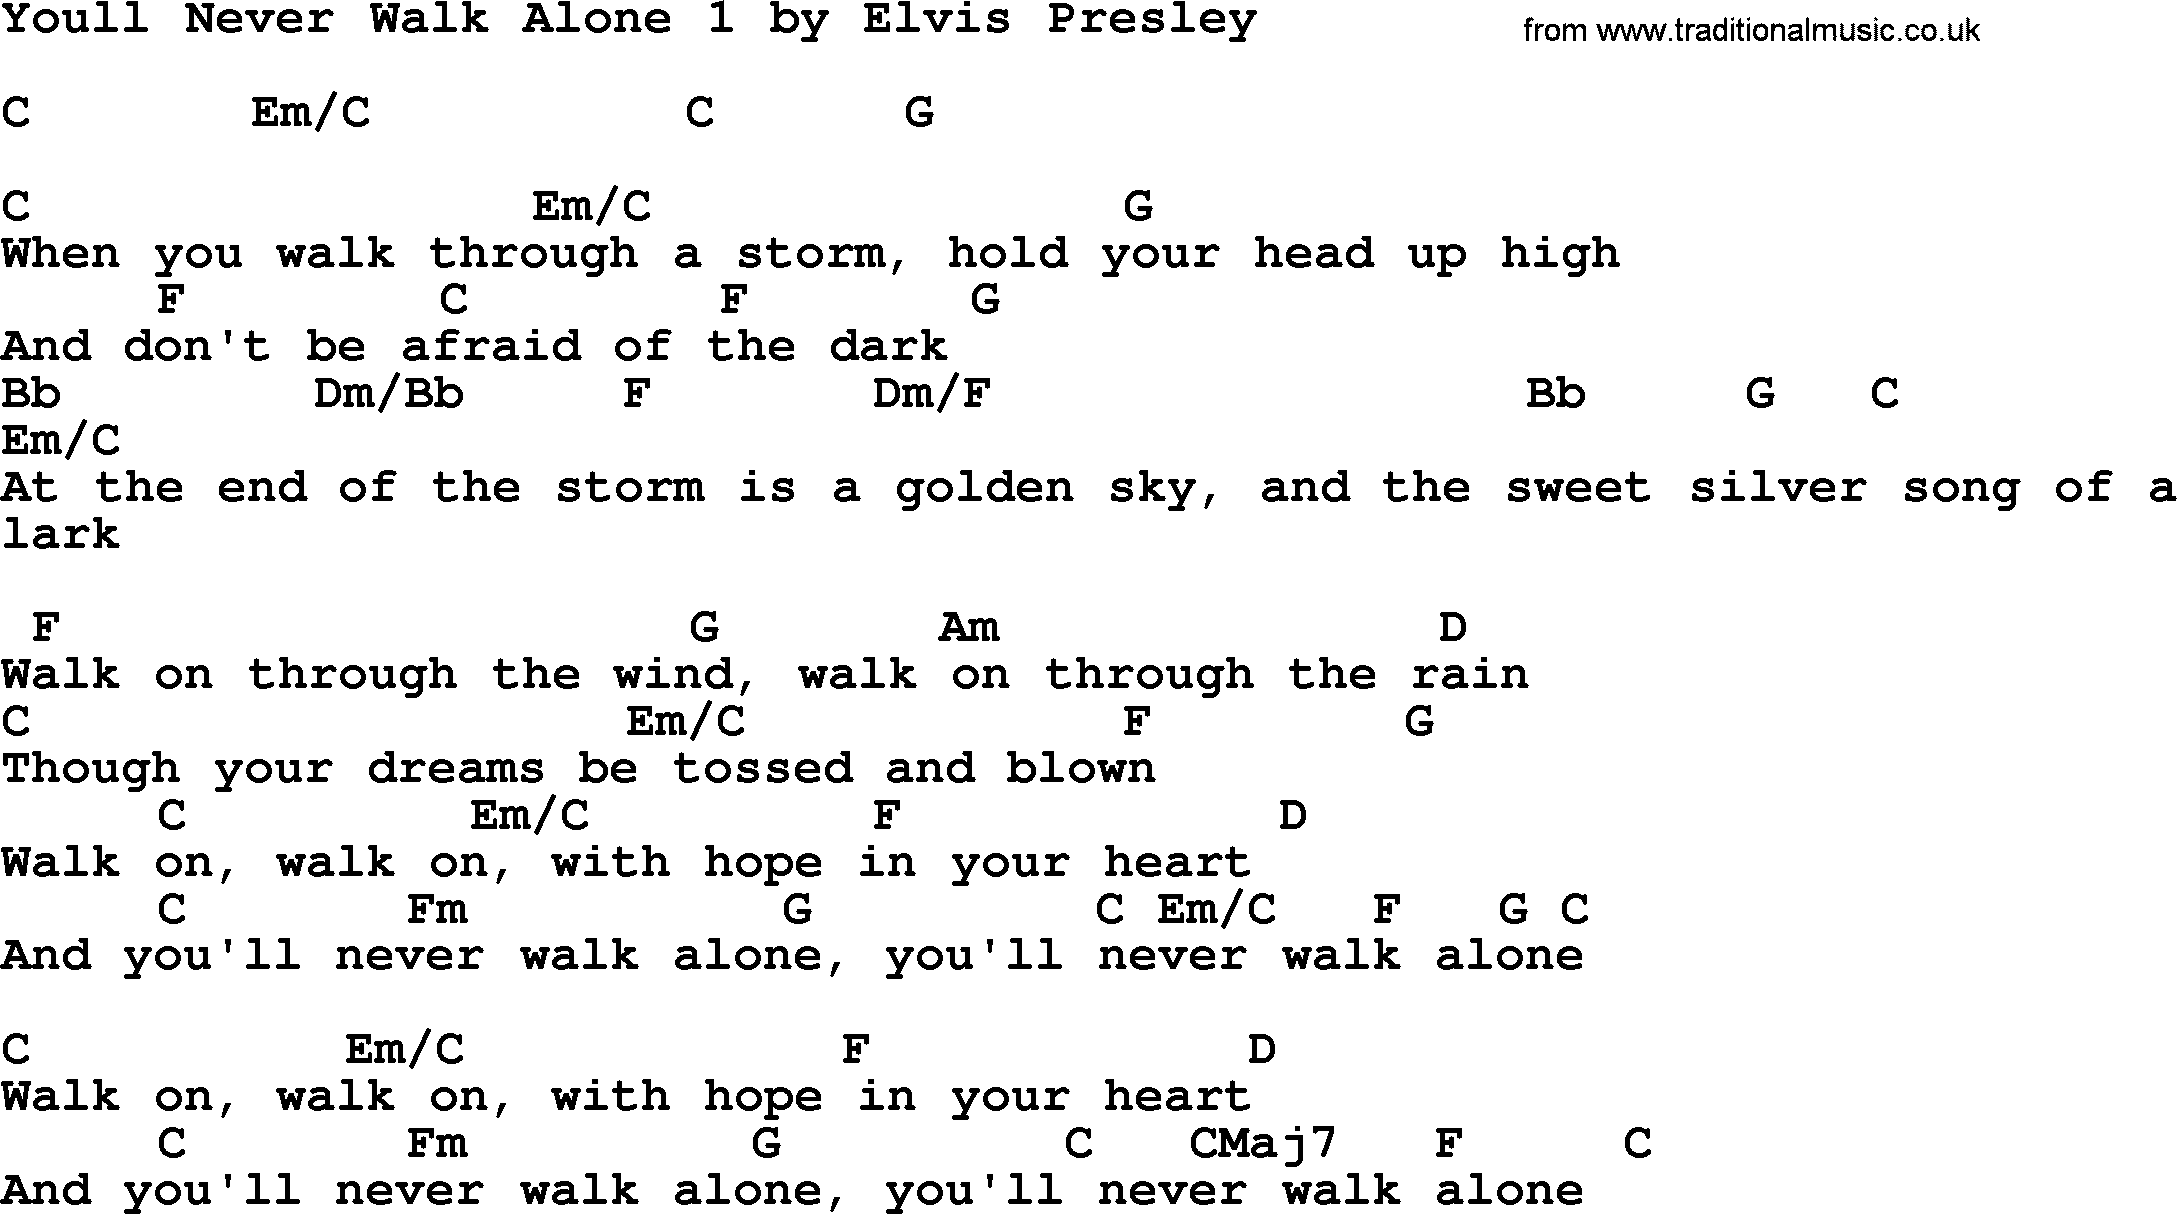 Elvis Presley song: Youll Never Walk Alone 1, lyrics and chords